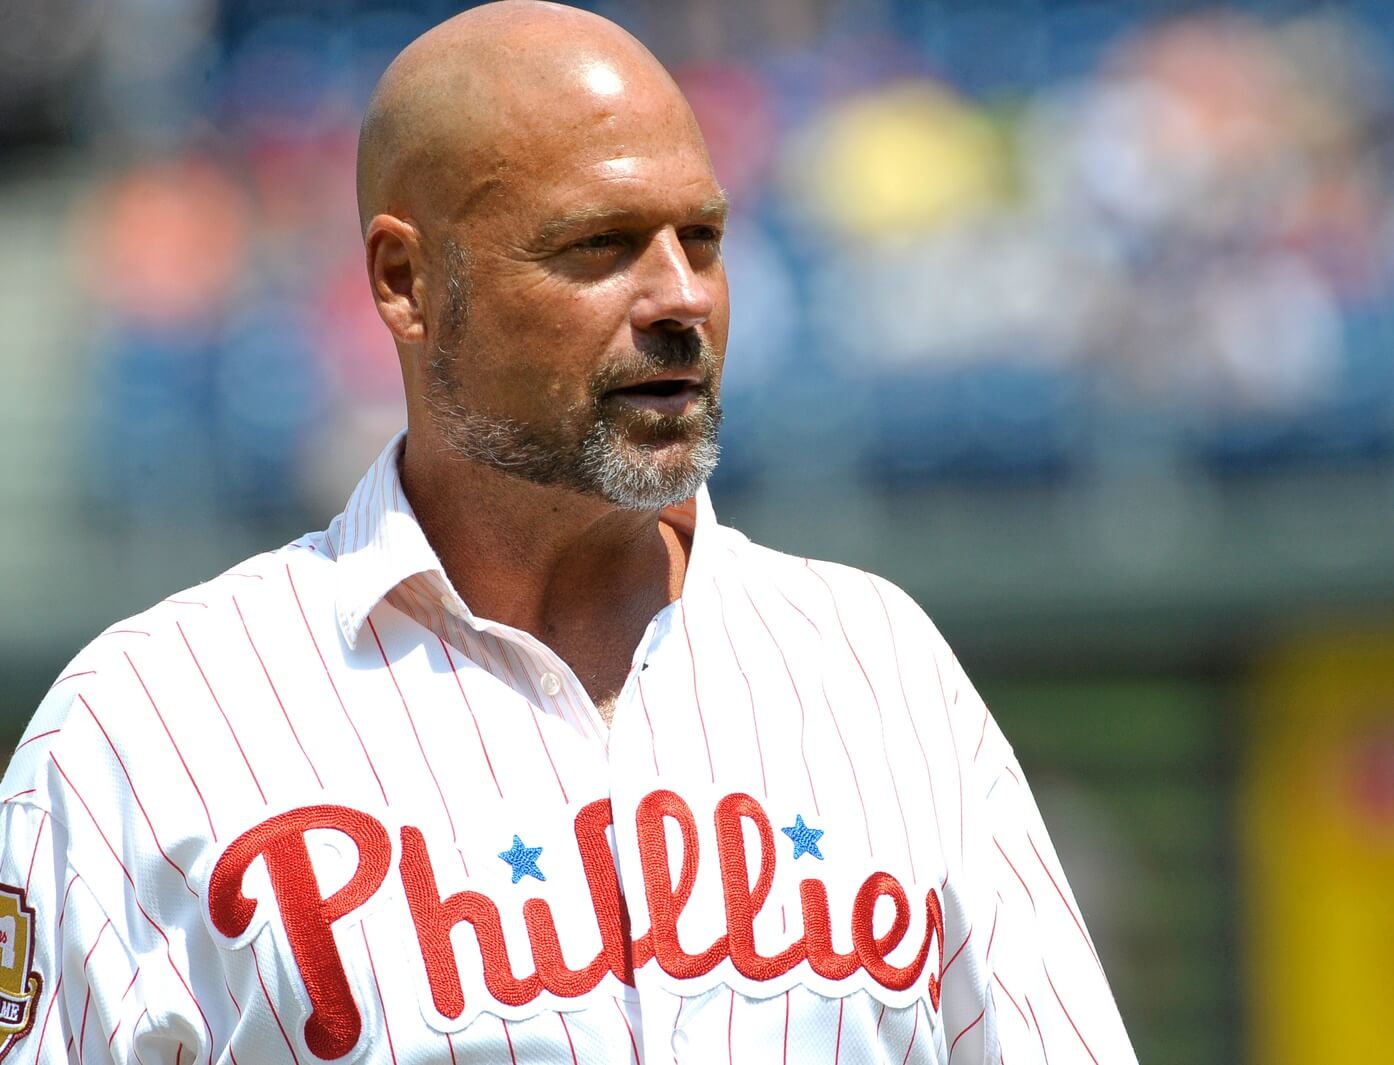 In losing Phillies great Darren Daulton, we are finding ourselves